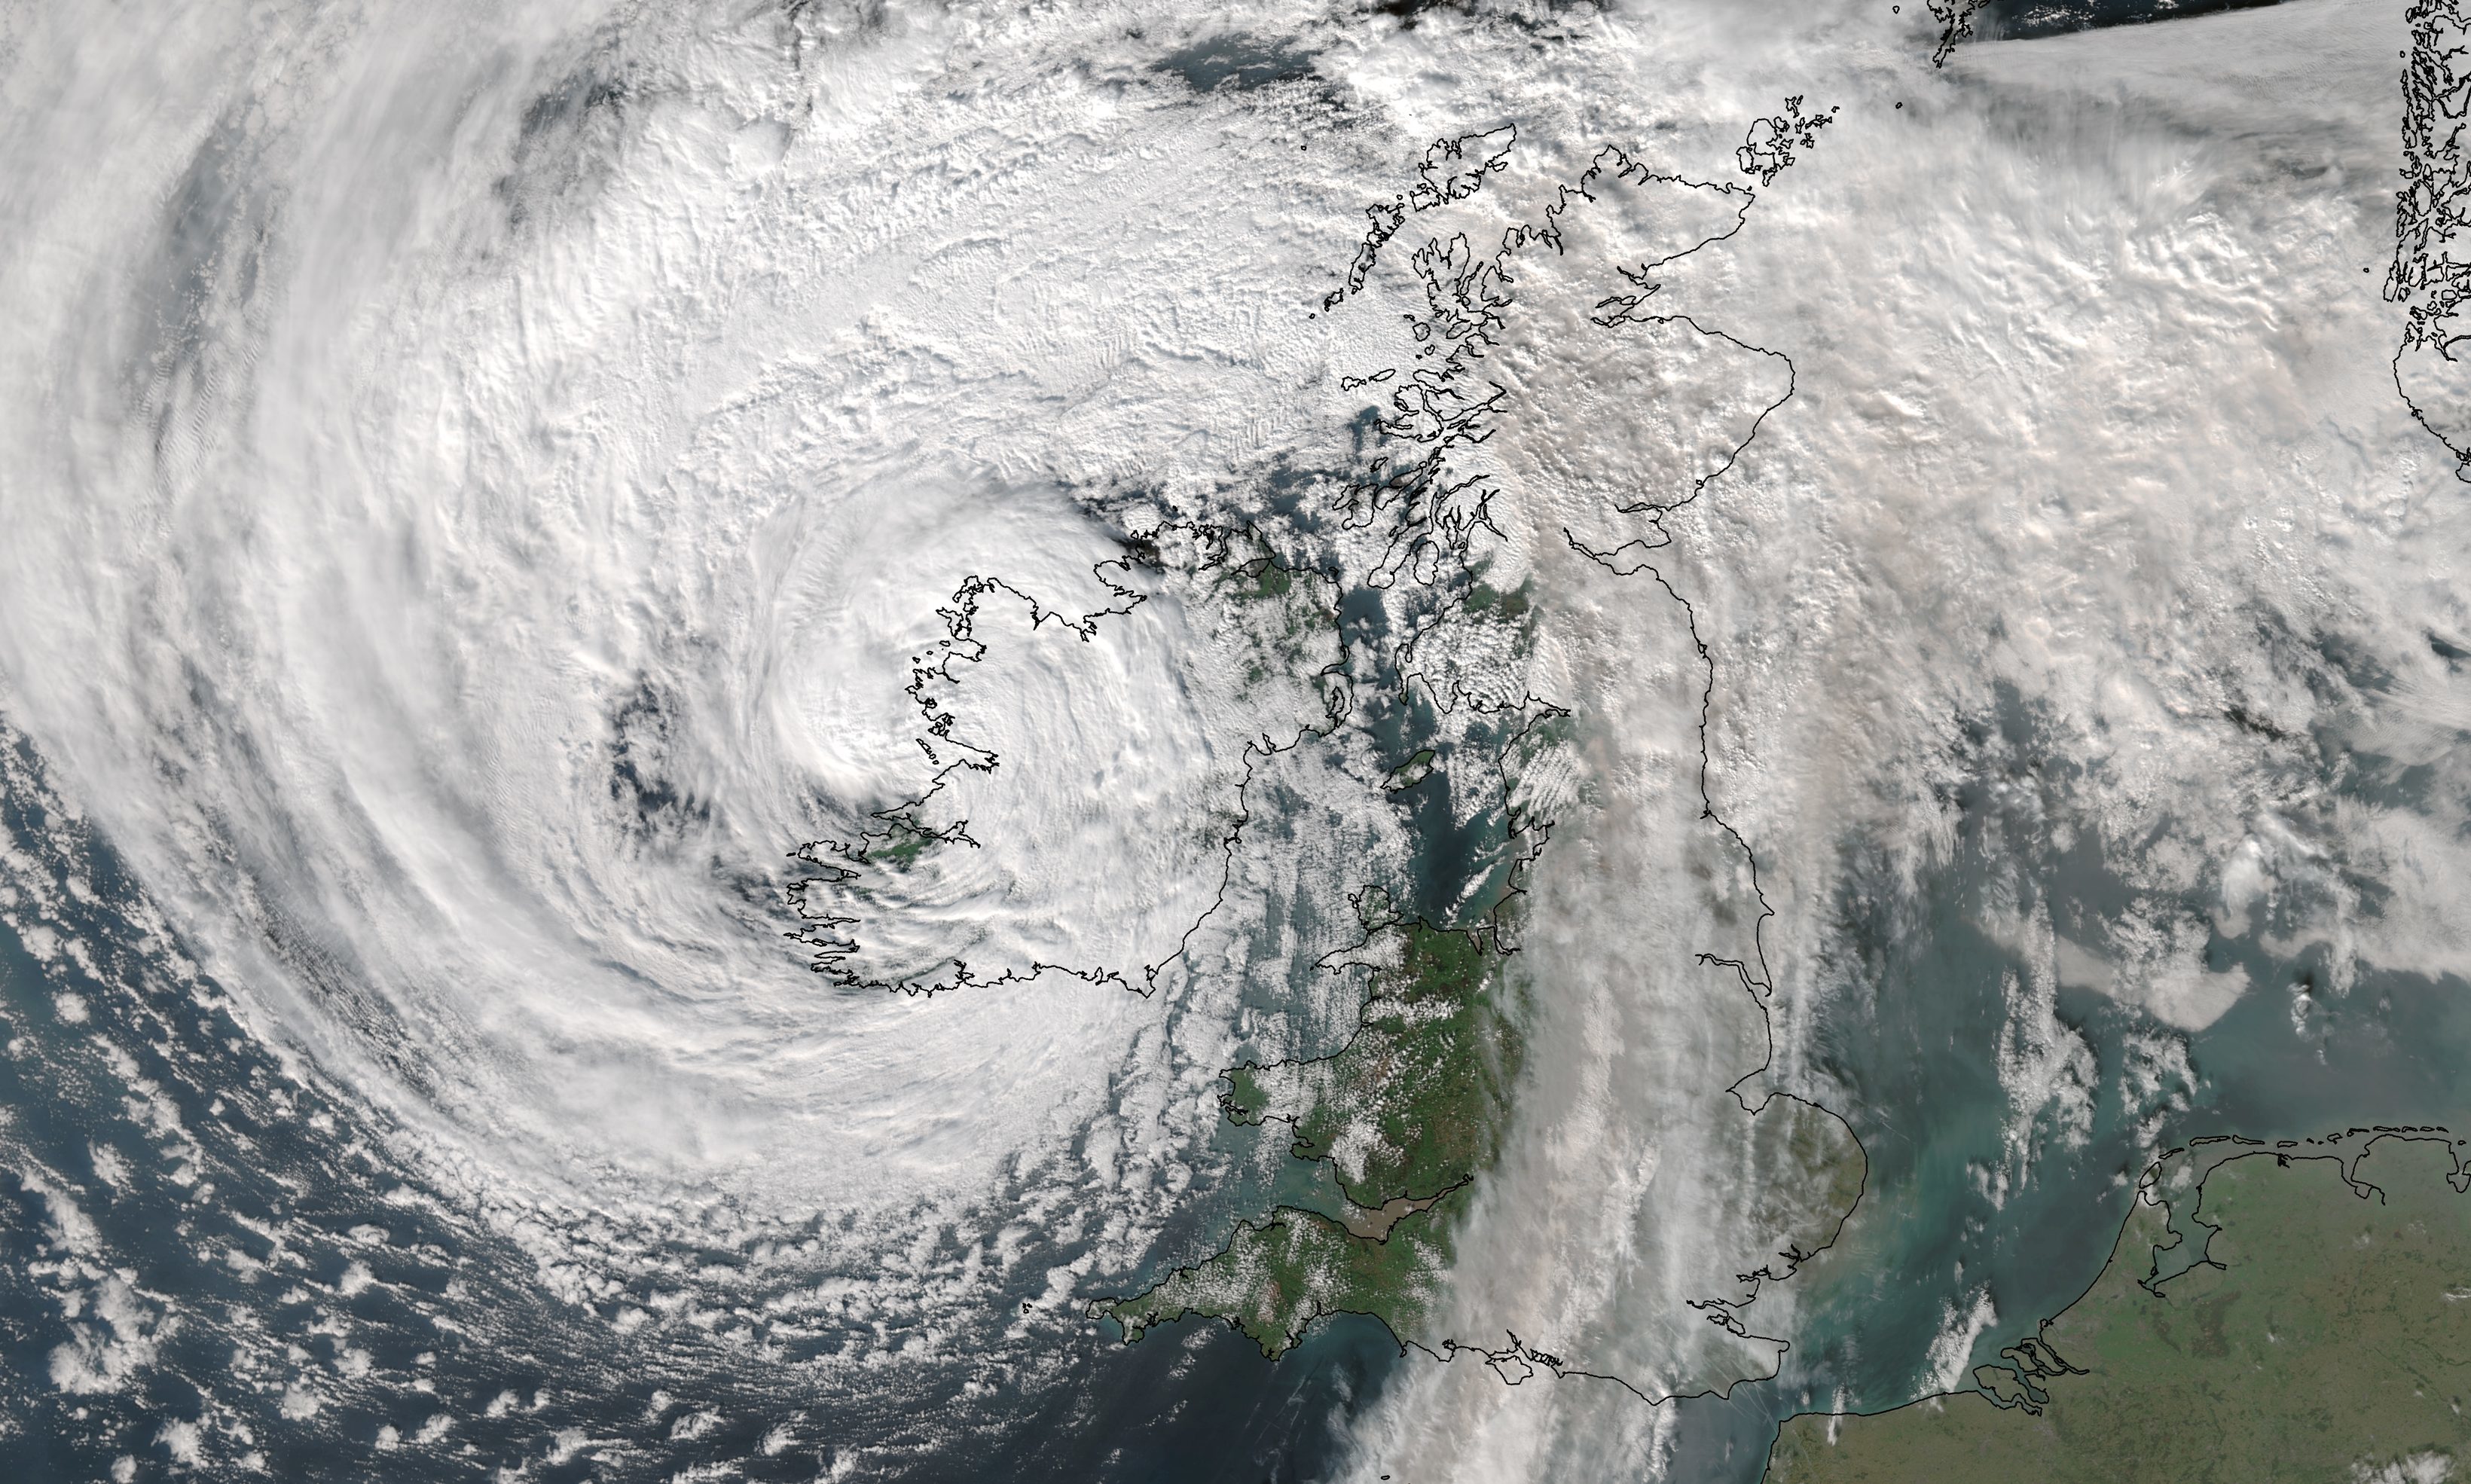 A satellite image of Storm Ophelia. Credit: University of Dundee/'NEODAAS.